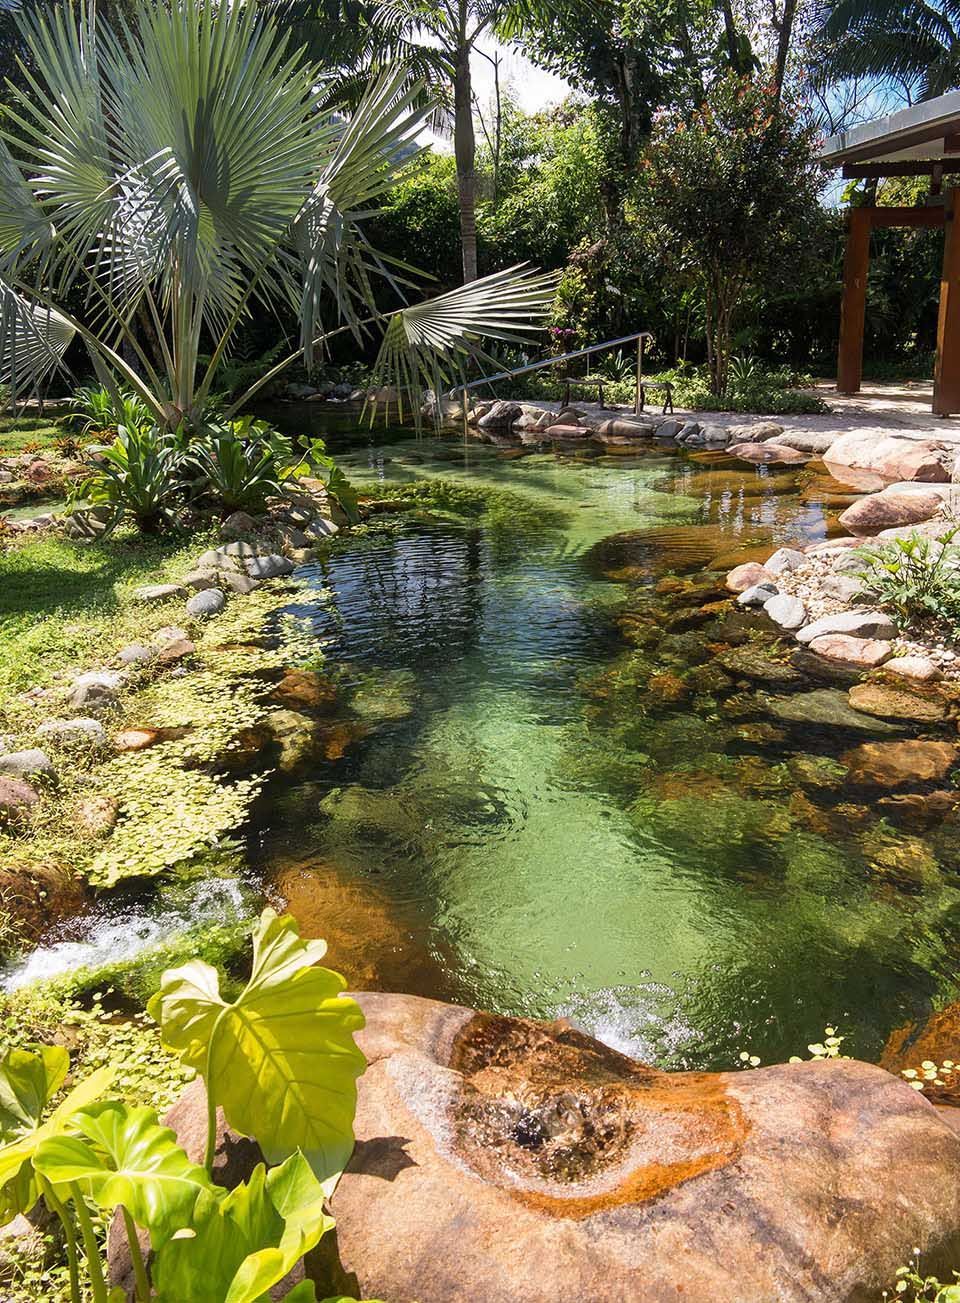 Natural Pool – designed by Peter Nitsche, with large, smooth granite boulders and